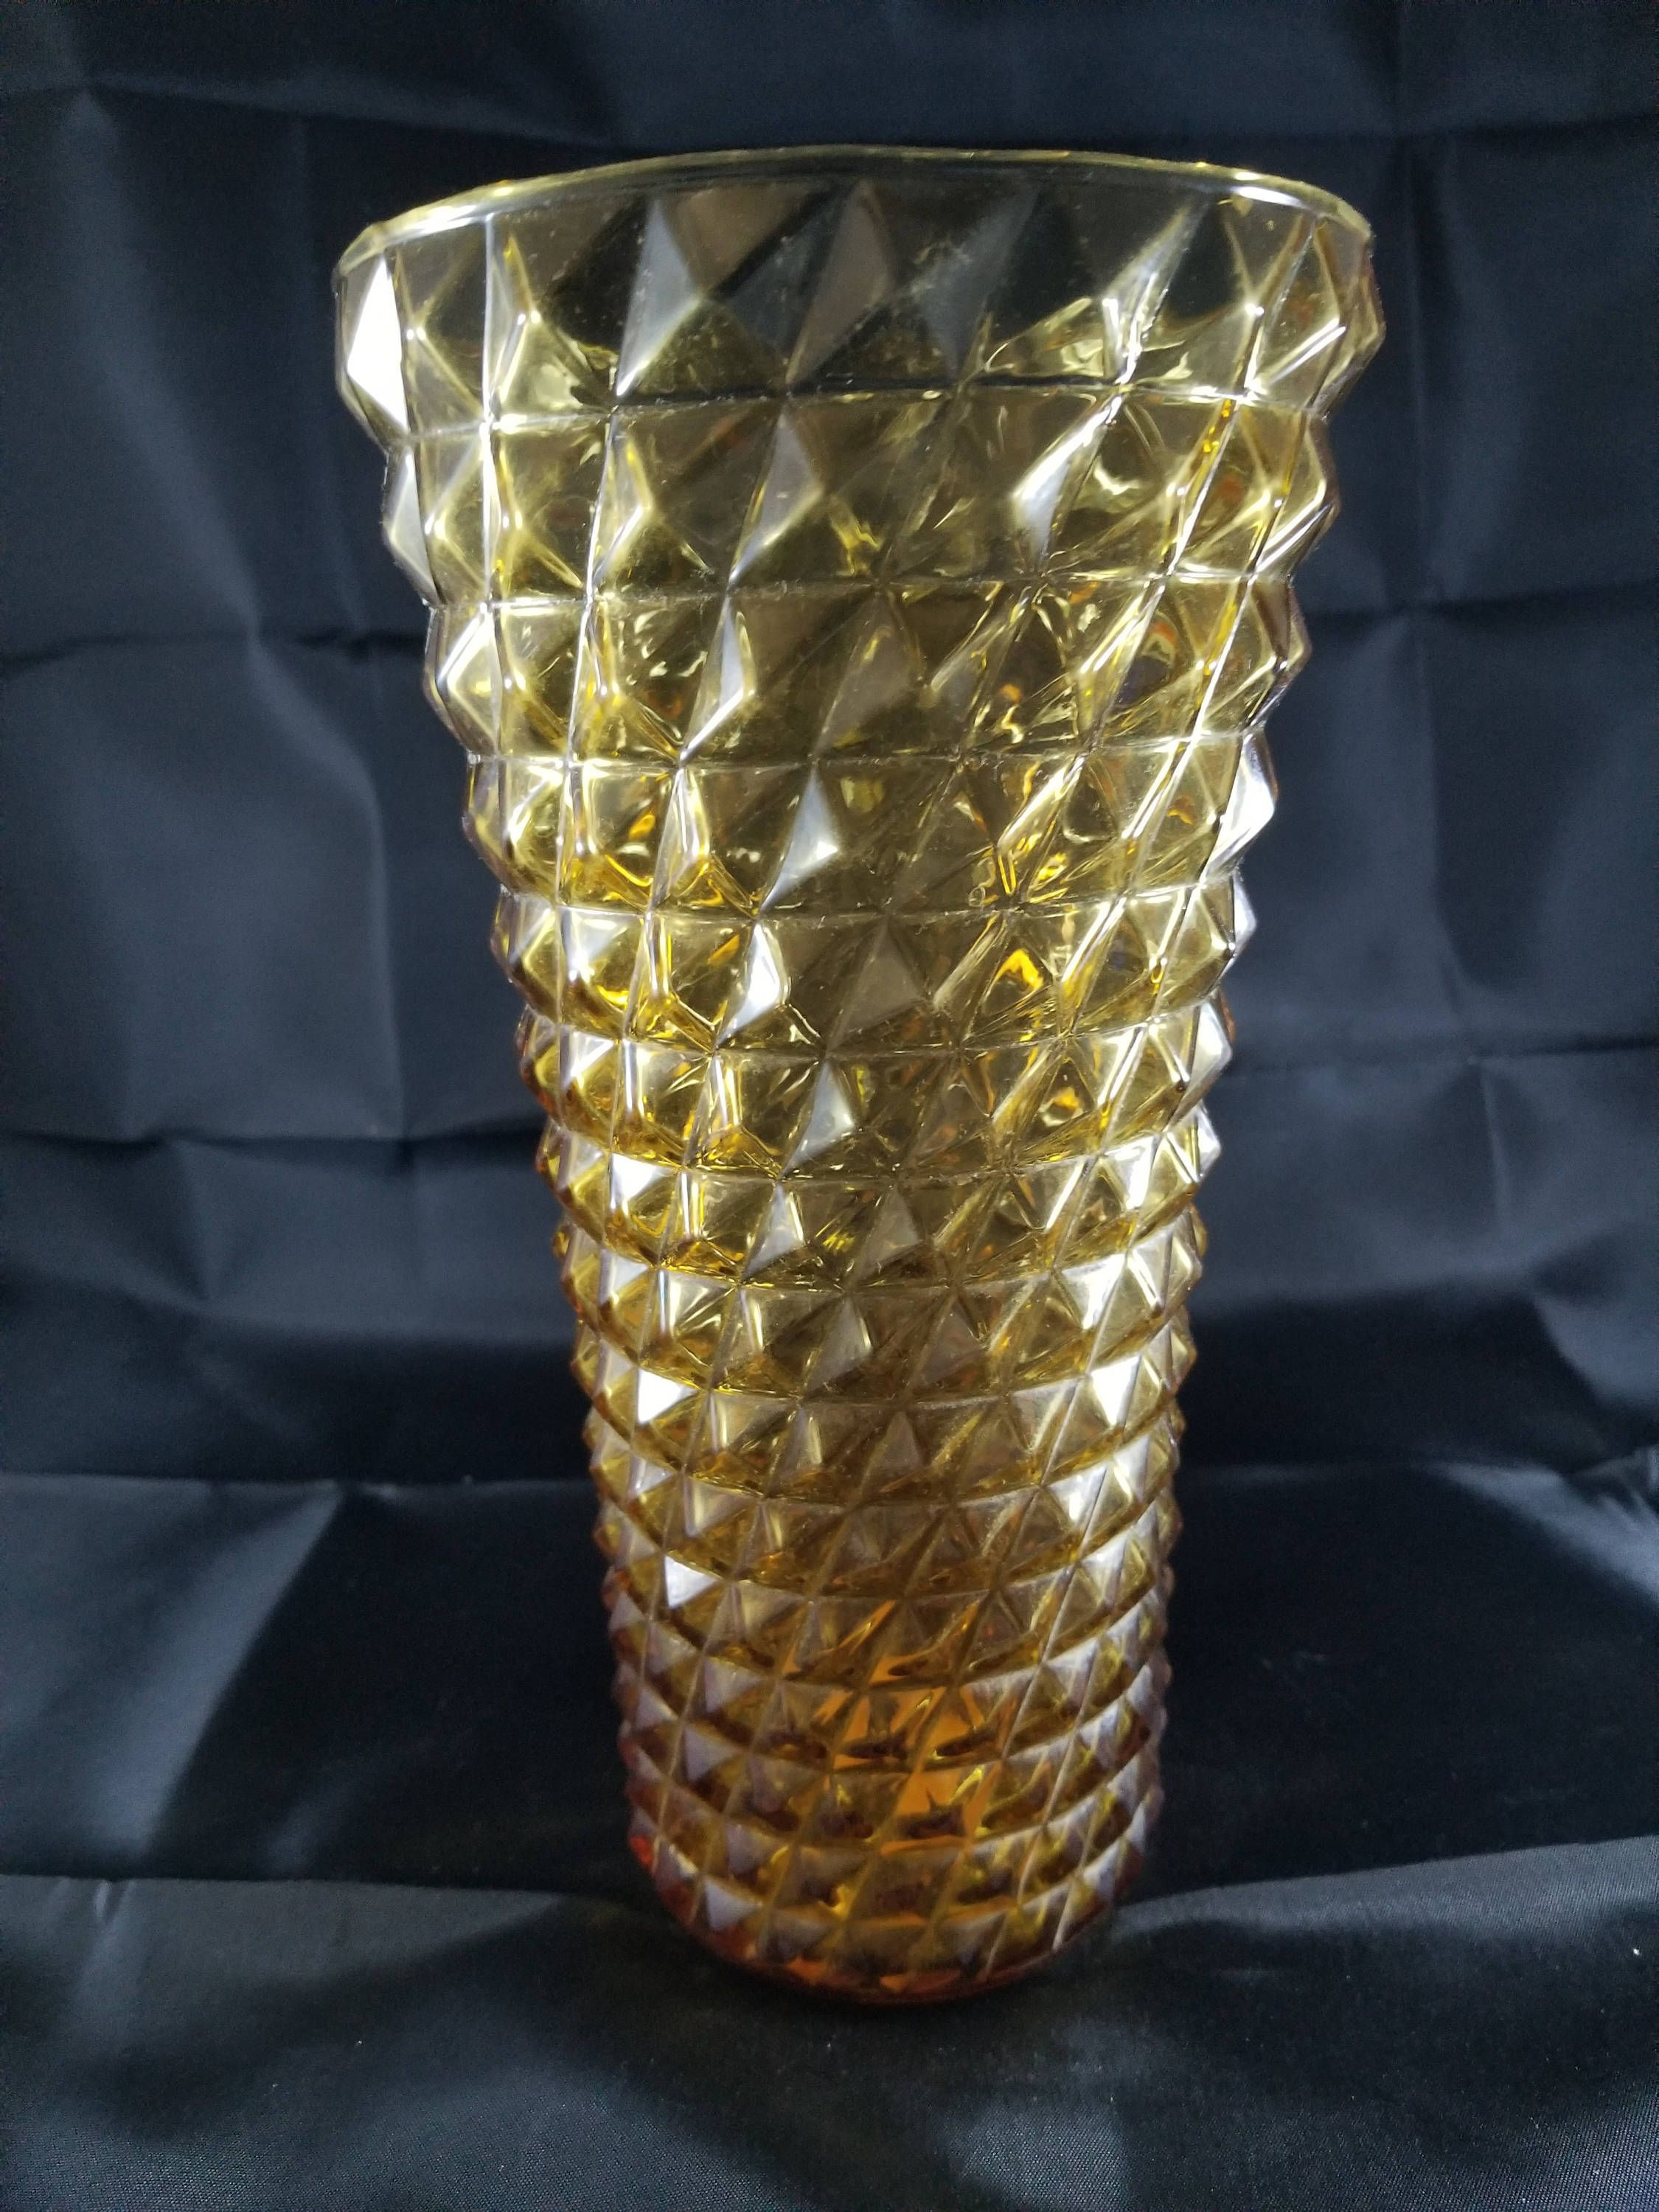 16 attractive Tall Crystal Vases for Centerpieces 2024 free download tall crystal vases for centerpieces of large rare vintage rossini genuine empoli glass amber hobnail italy with regard to large rare vintage rossini genuine empoli glass amber hobnail italy 